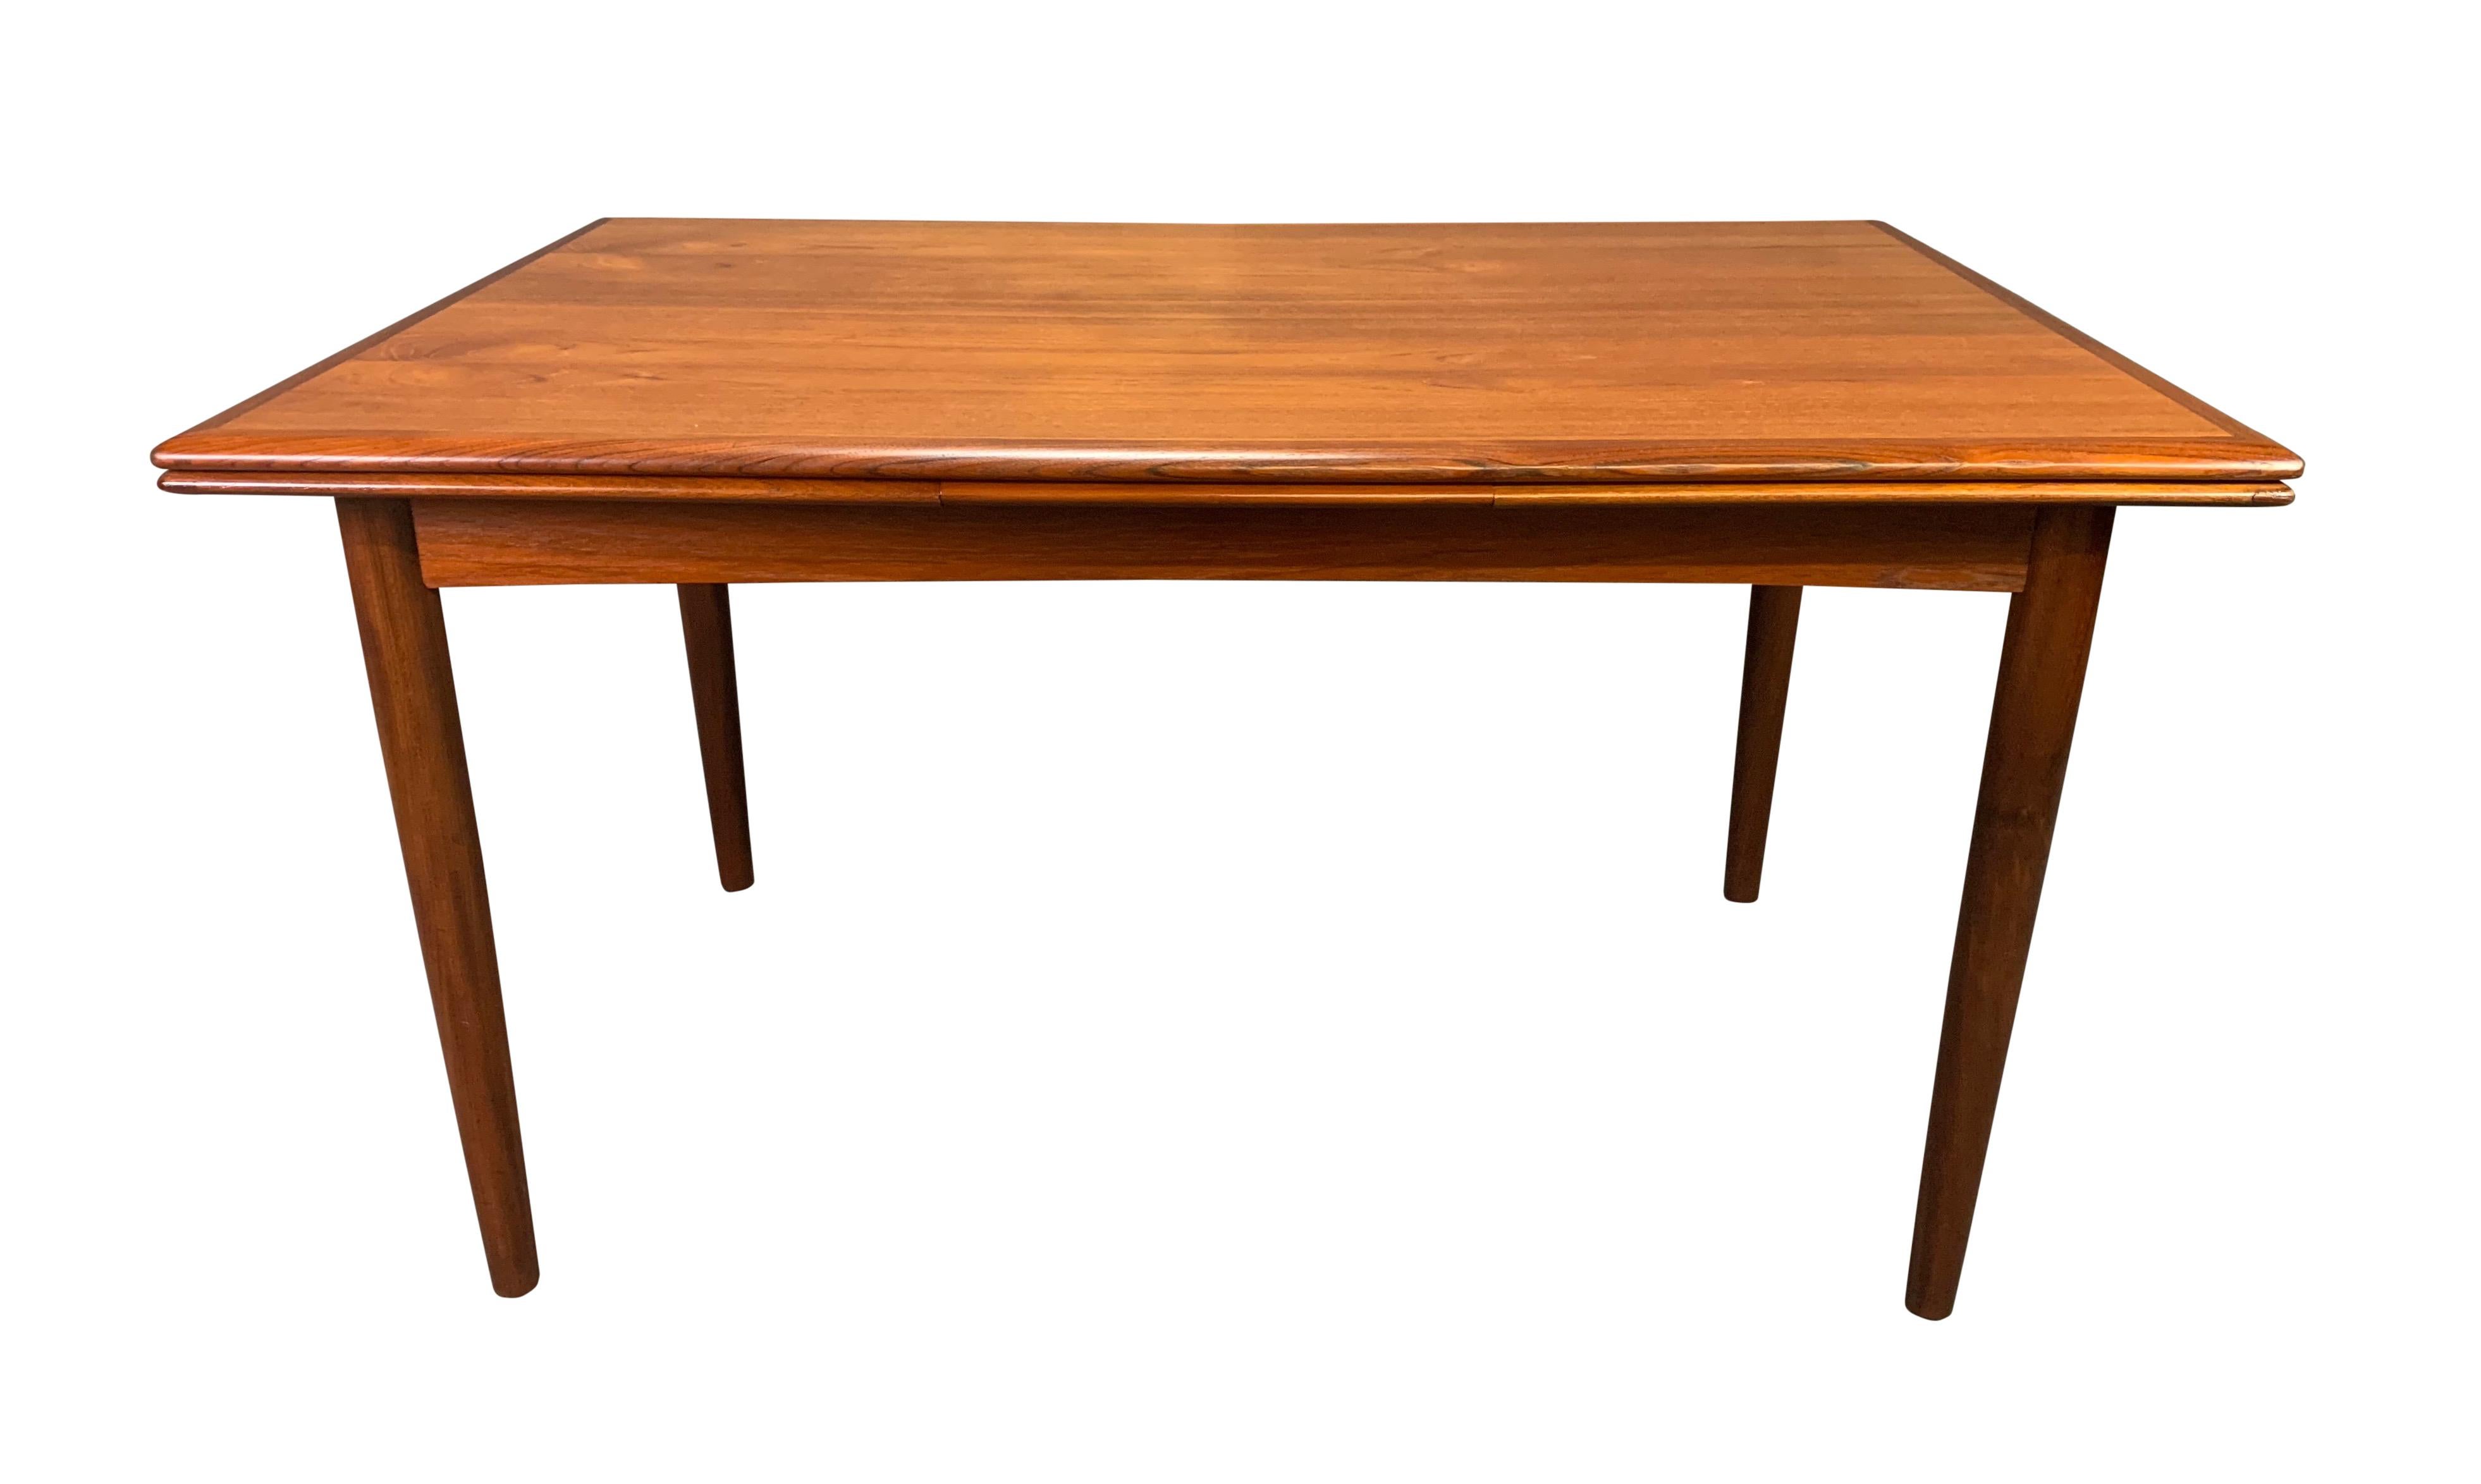 Here is a beautiful 1960s Scandinavian Modern teak dining table recently imported from Denmark to California before its restoration.
This lovely table features a vibrant wood grain, two extensions draw leaves and four solid teak tapered